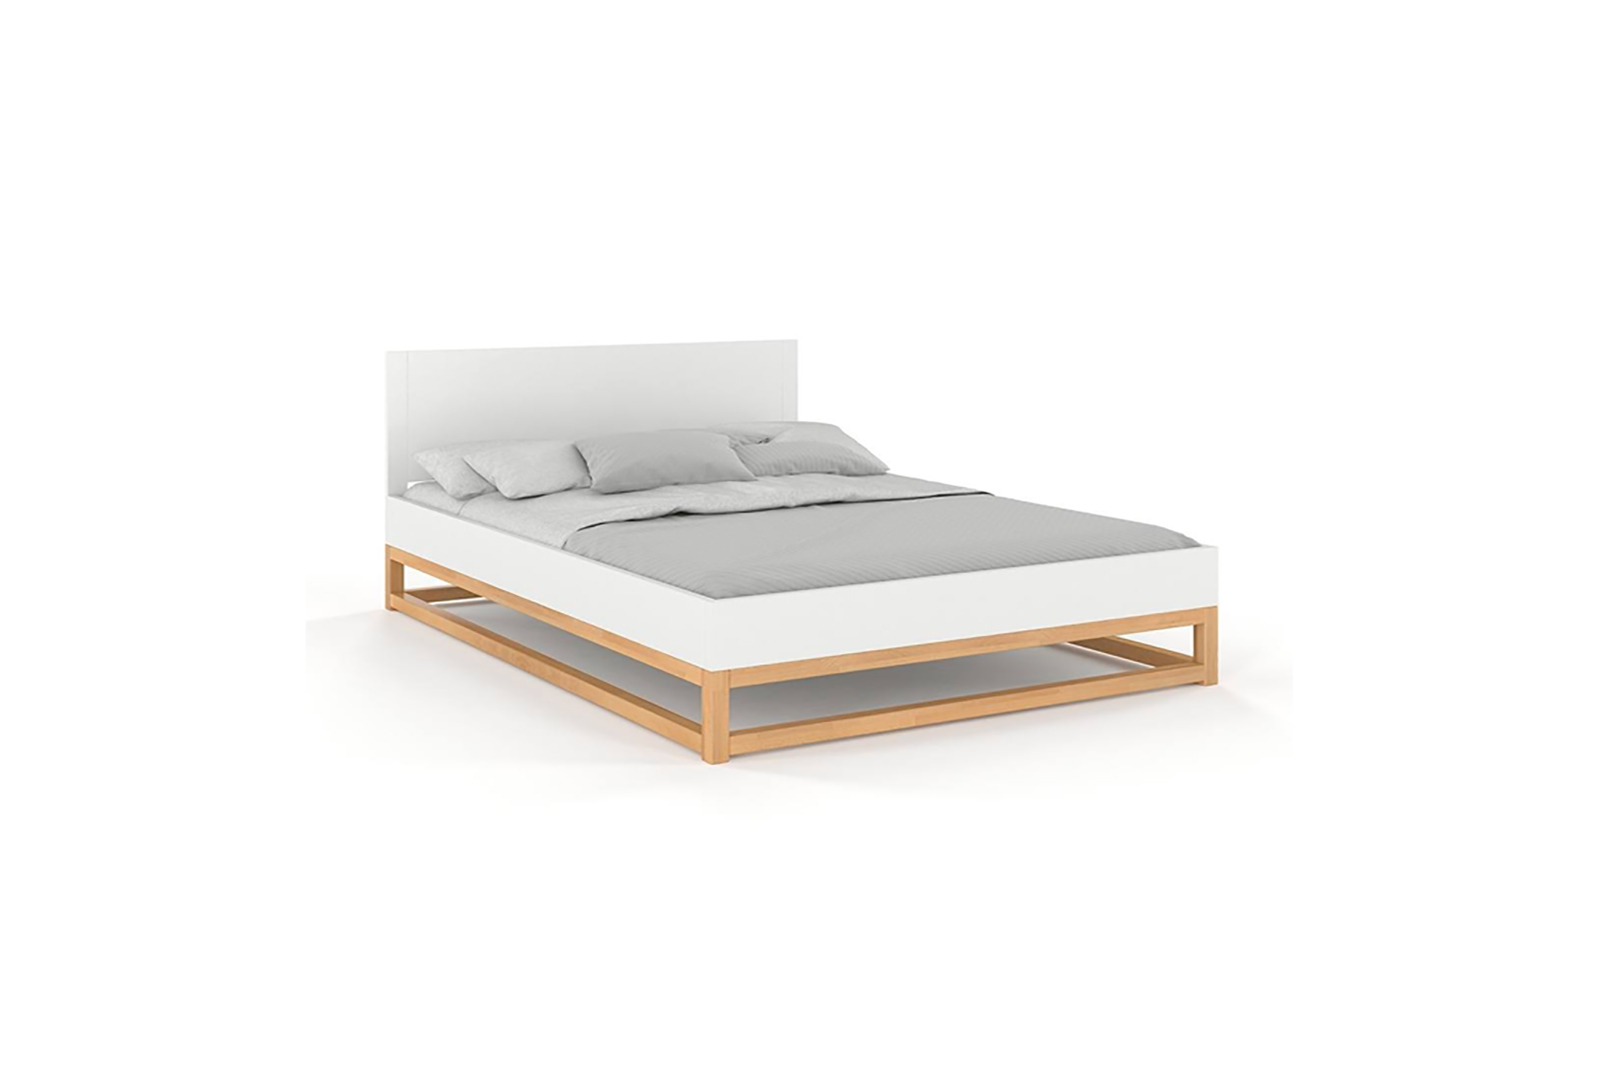 VISBY KARIN WOODEN BED